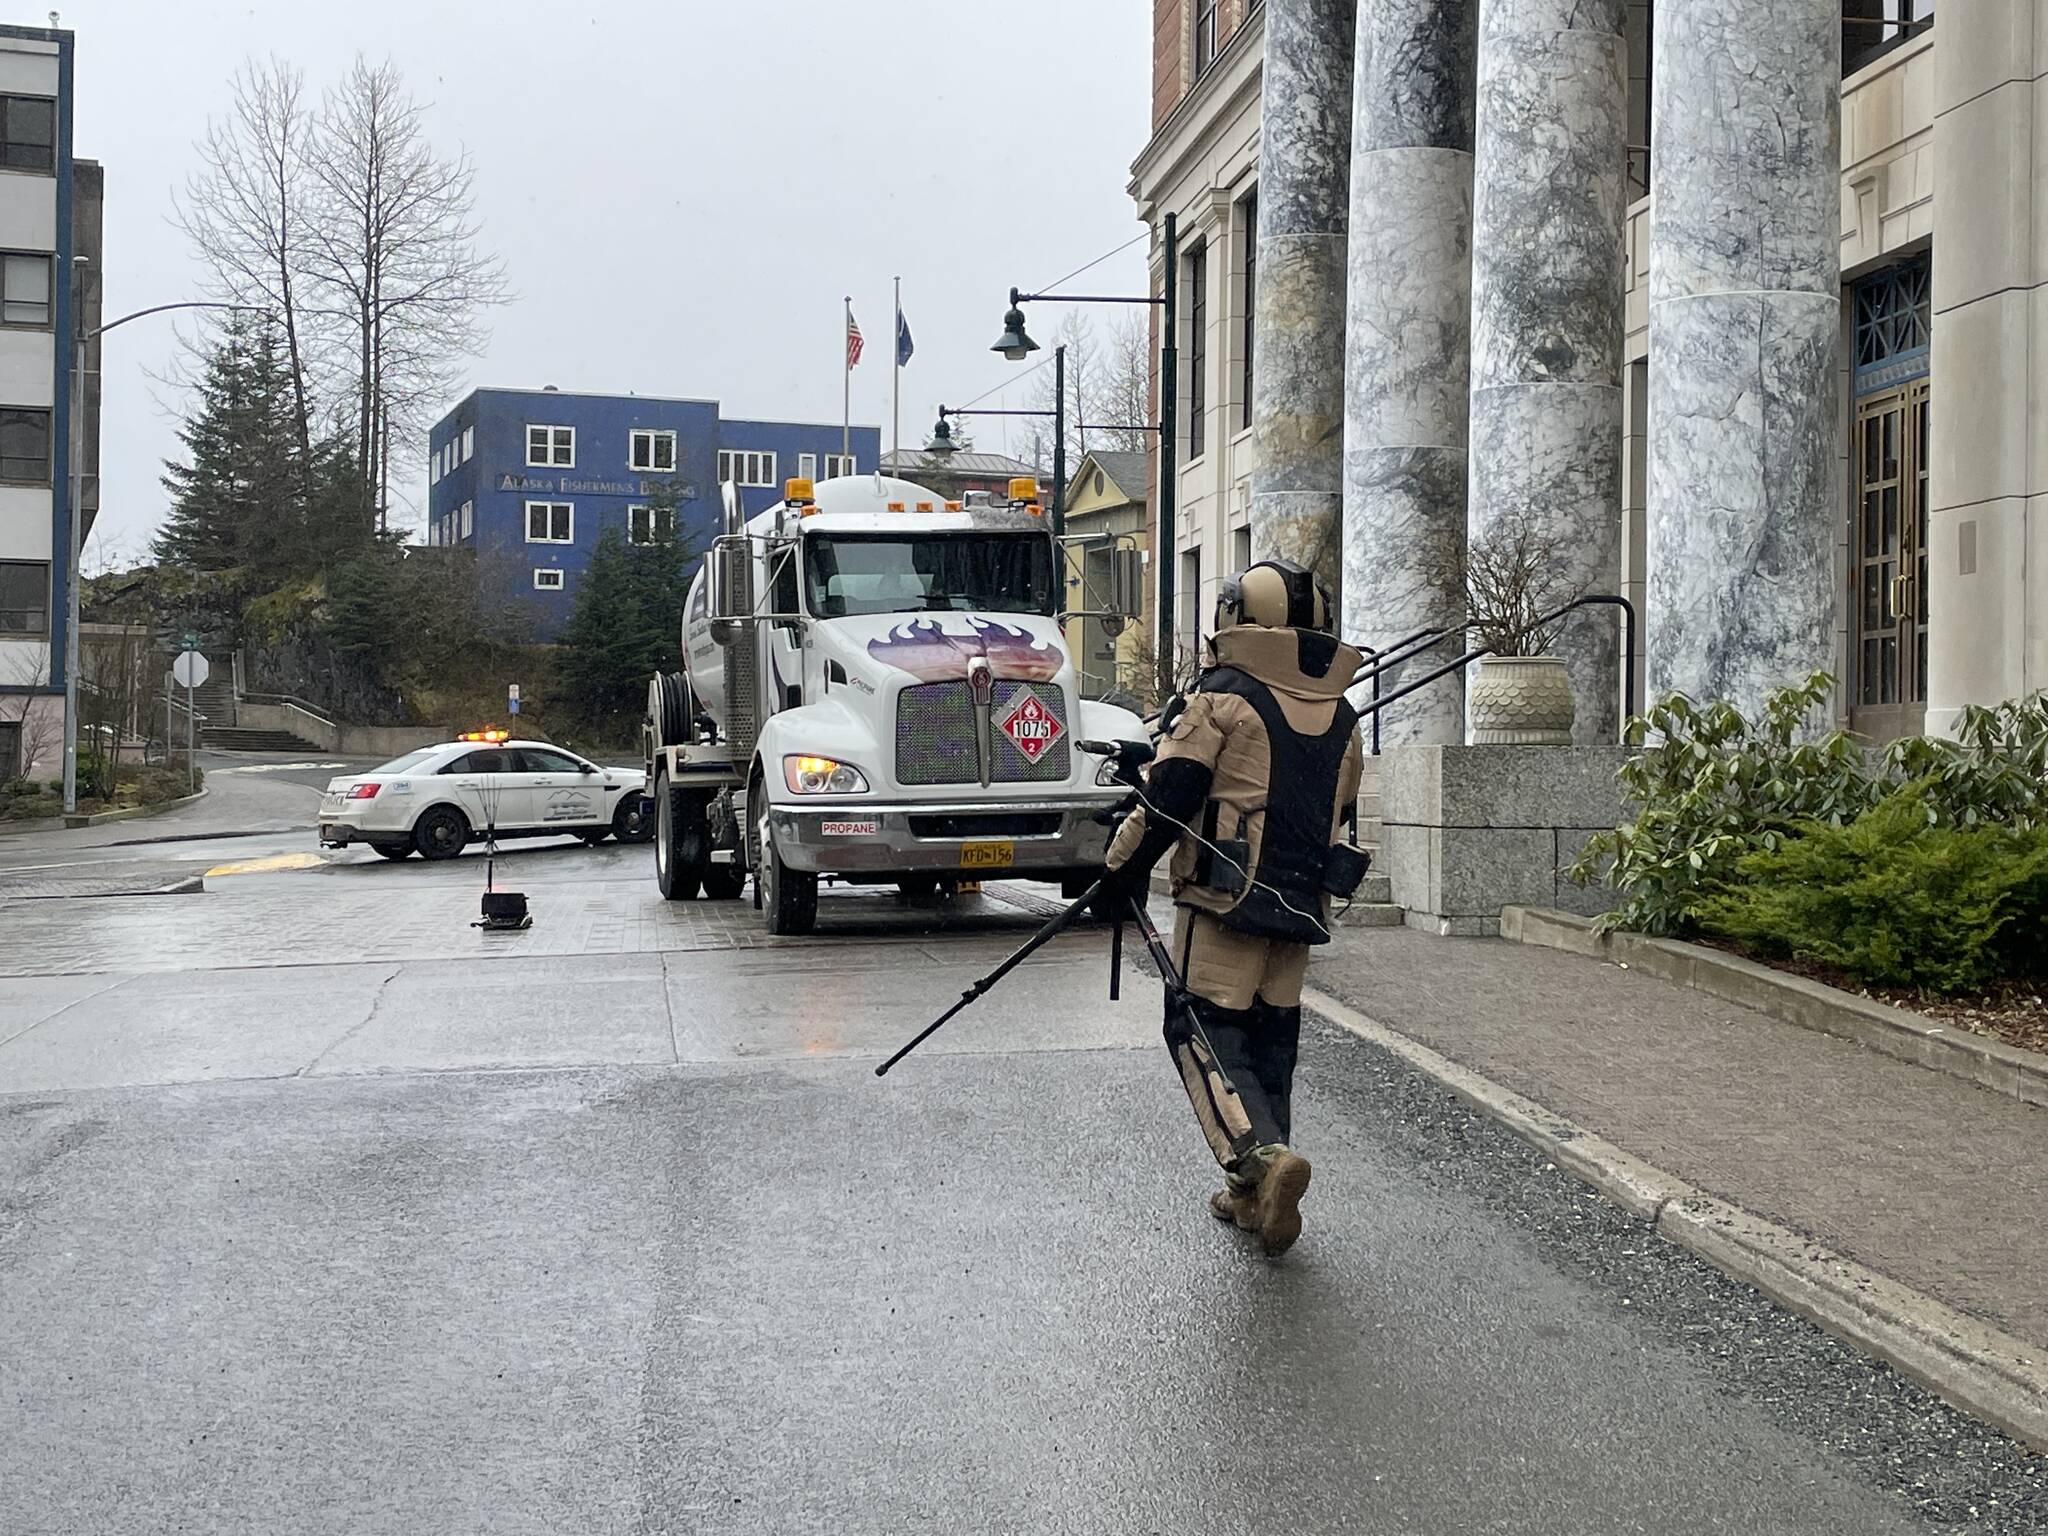 A Navy explosive ordnance disposal technician approaches a simulated vehicle-borne improvised explosive device in front of the Alaska State Capitol on March 10, 2022. (Michael S. Lockett / Juneau Empire)